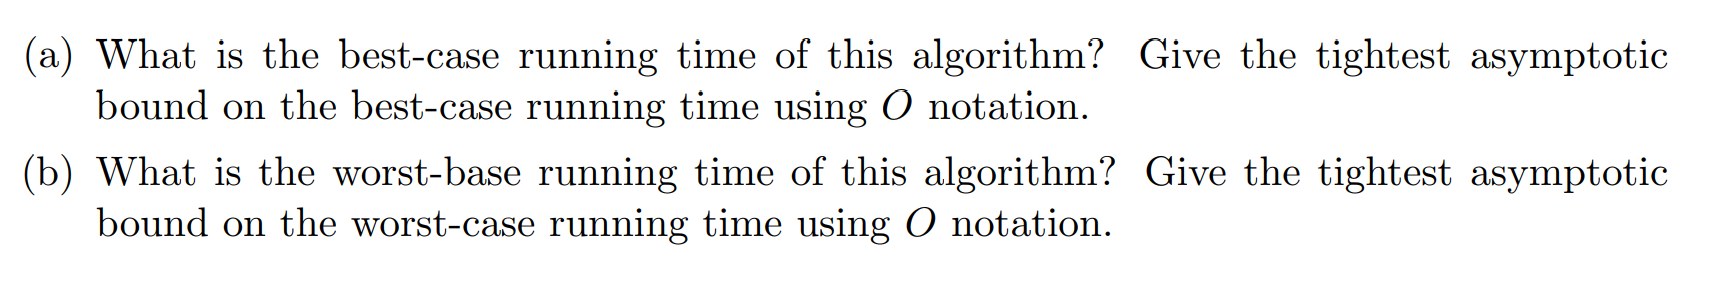 (a) What is the best-case running time of this algorithm? Give the tightest asymptotic
bound on the best-case running time using O notation.
(b) What is the worst-base running time of this algorithm? Give the tightest asymptotic
bound on the worst-case running time using O notation.
